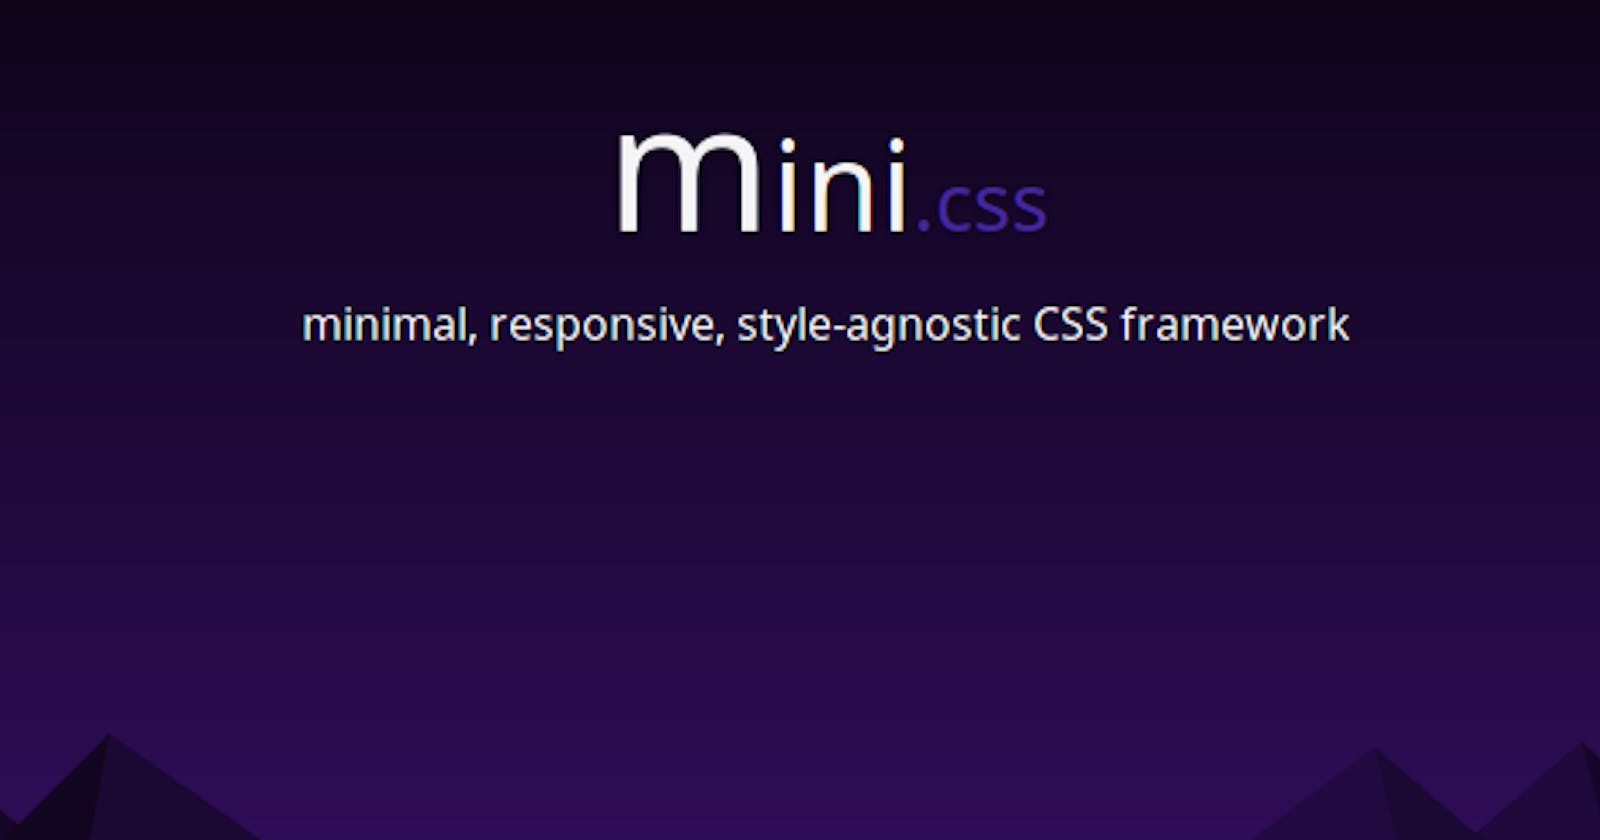 The legacy support conundrum or why mini.css doesn't like Internet Explorer